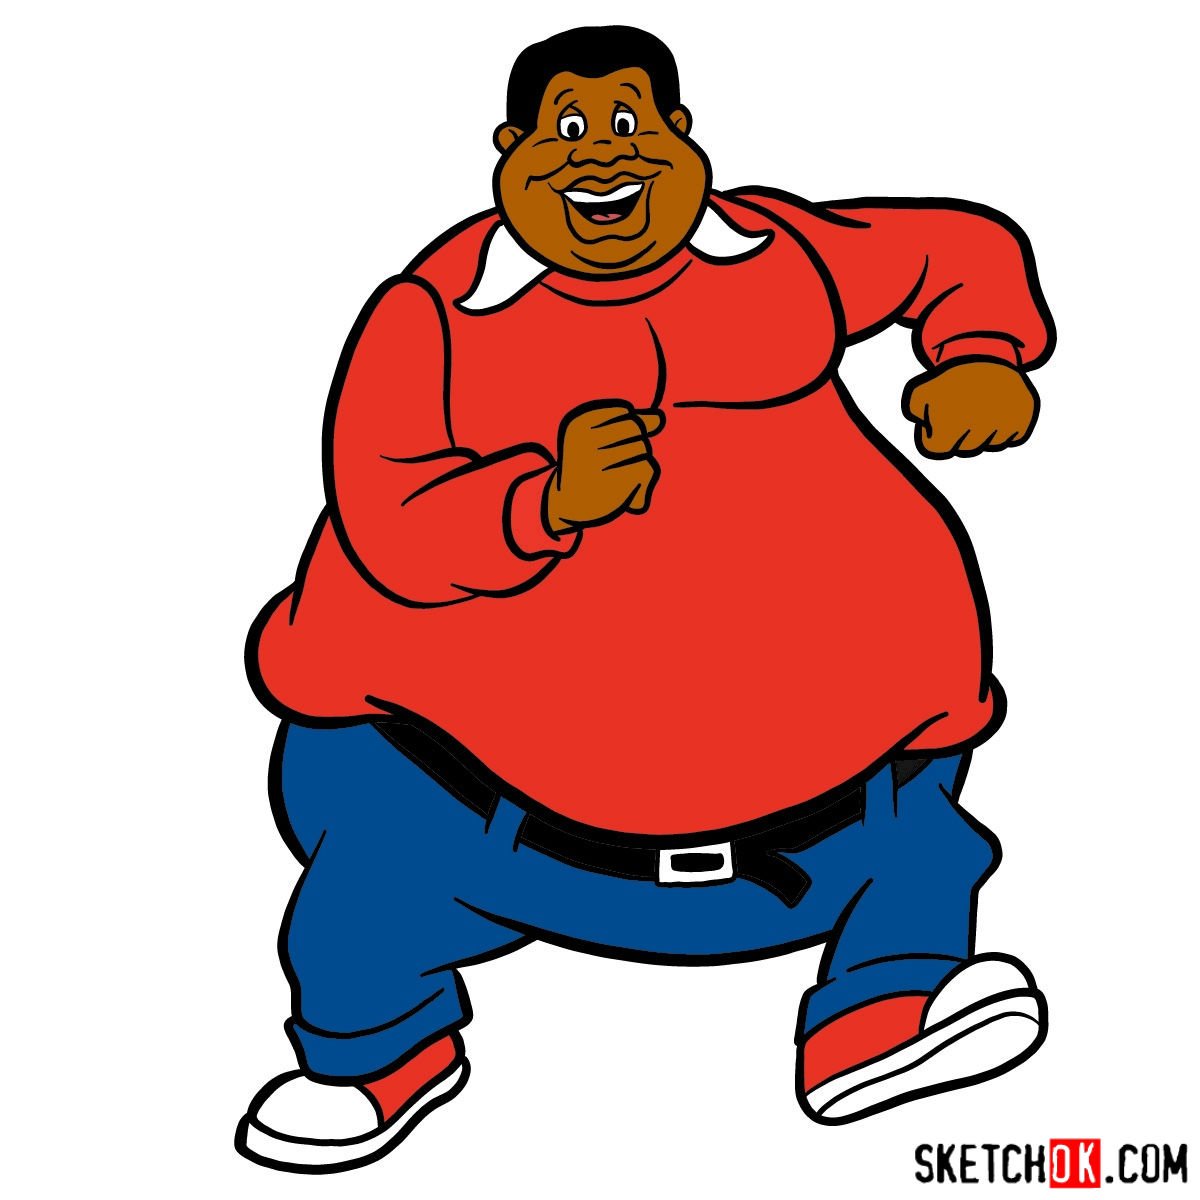 How to draw Fat Albert - Sketchok easy drawing guides